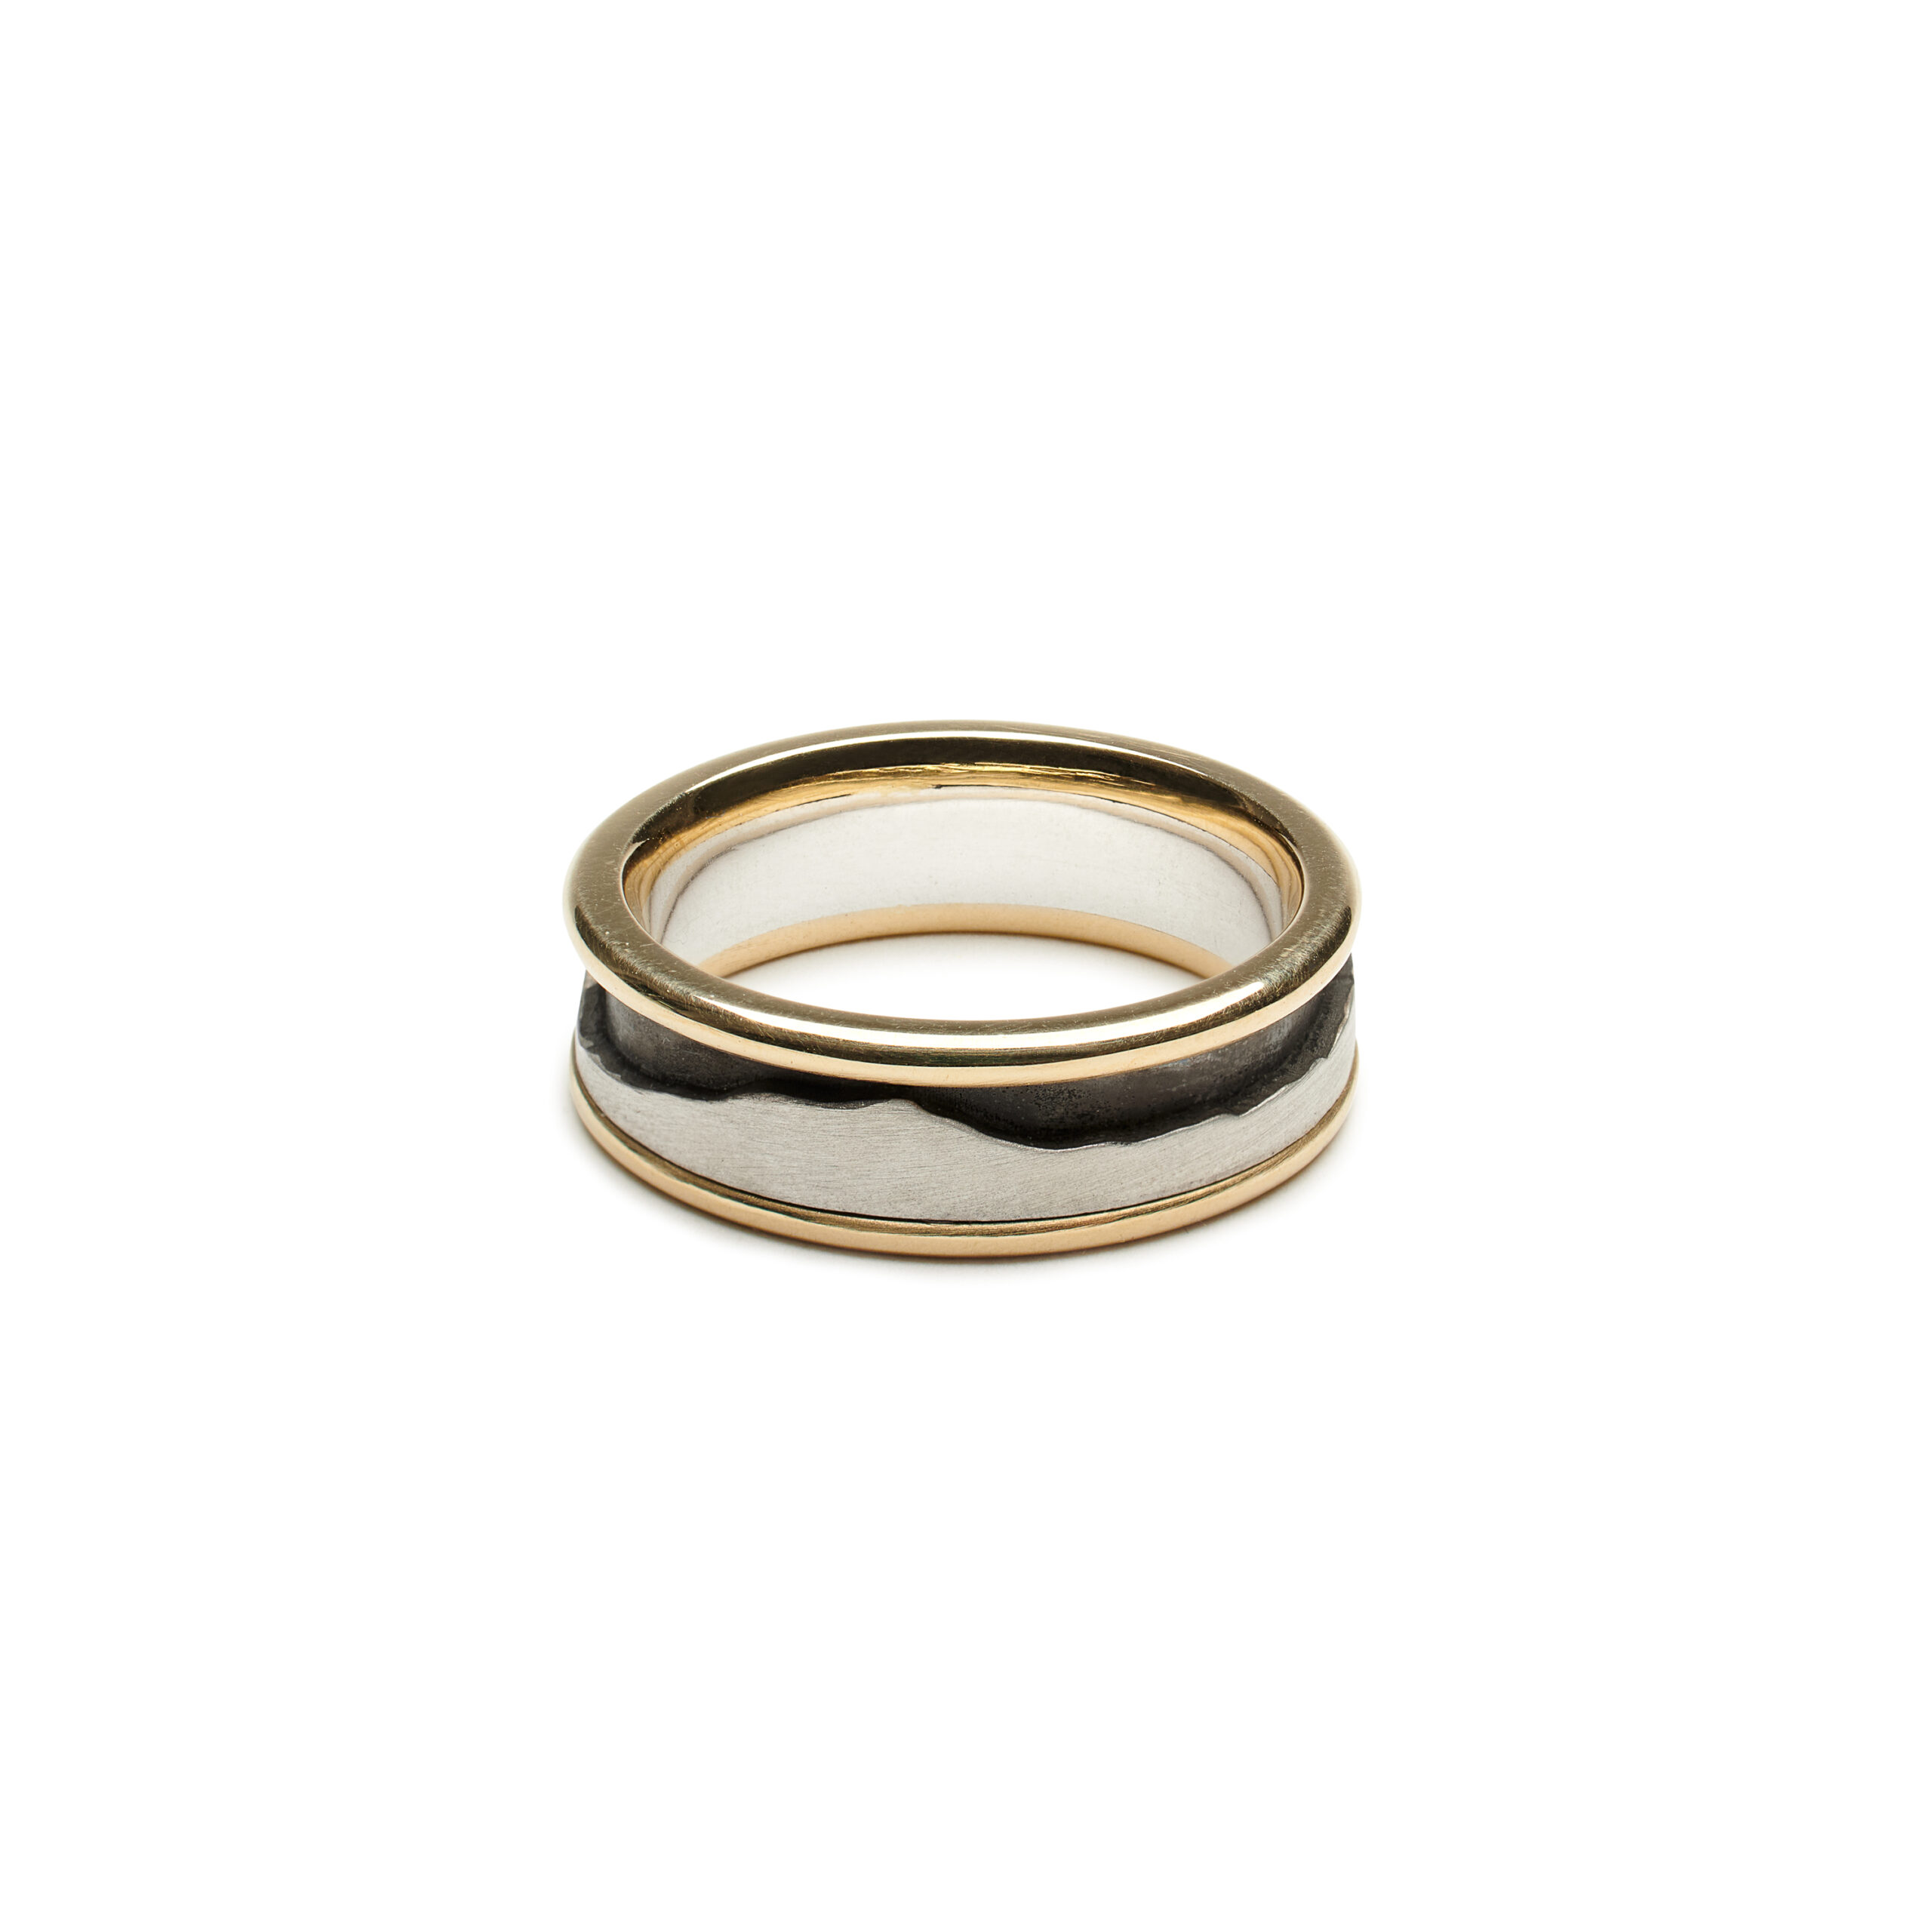 Camels hump depicted on the green mountain horizon ring with dual silver and gold metals